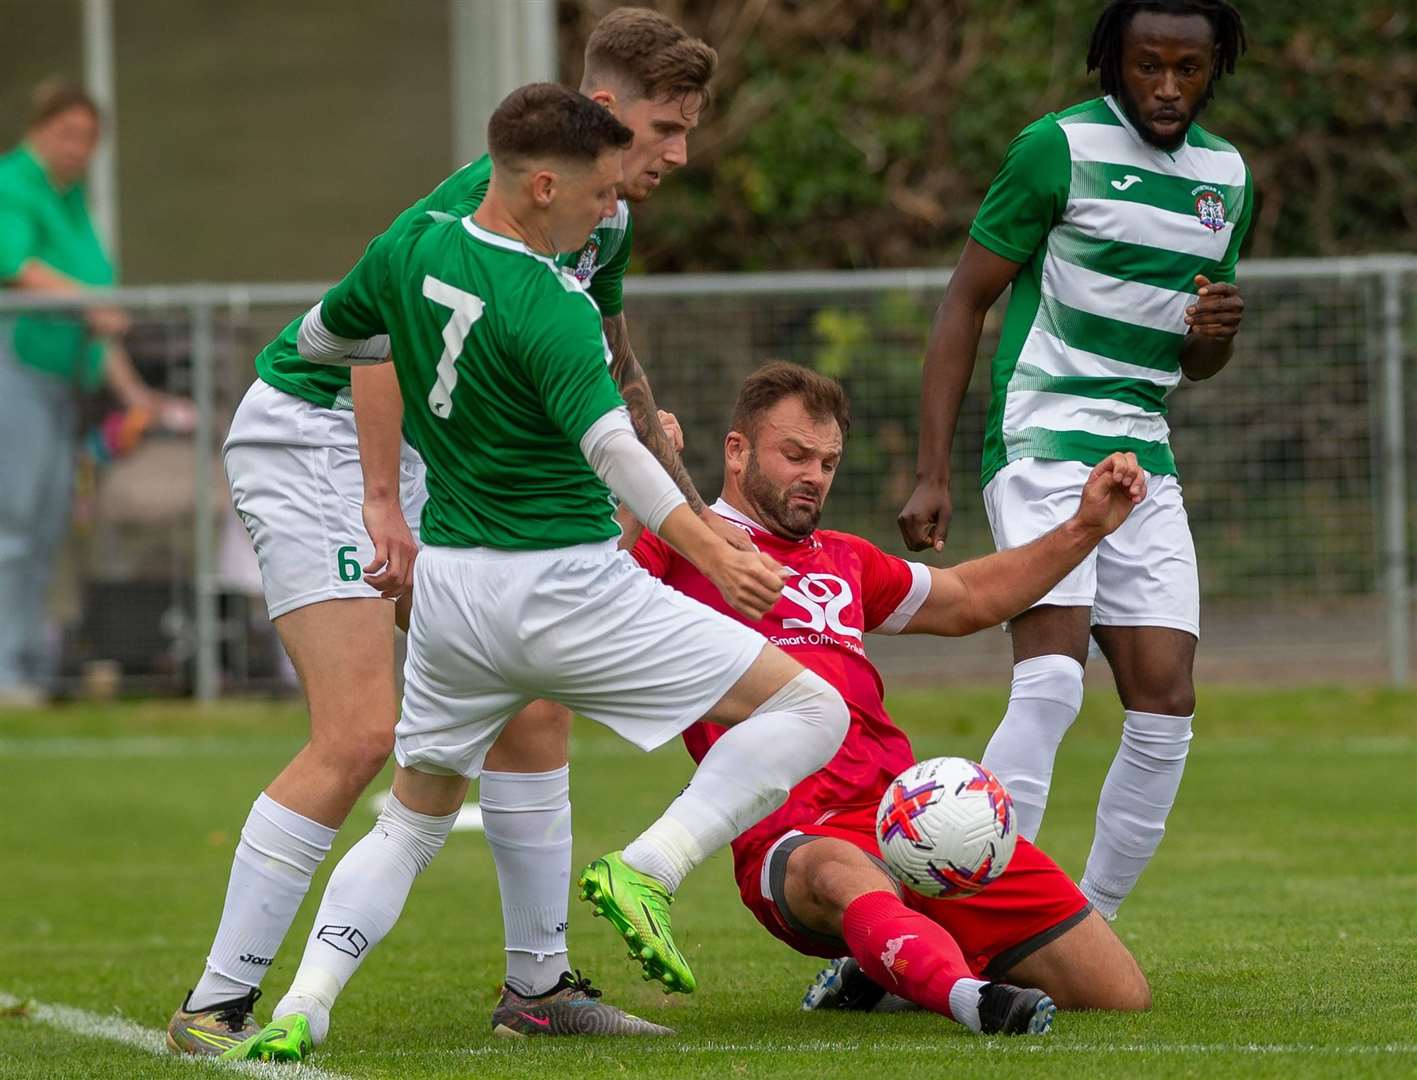 Corinthian midfielder Sam Bewick gets one over his old club – title favourites Town – early in the campaign as he challenges then-Faversham forward Gary Lockyer. Picture: Ian Scammell